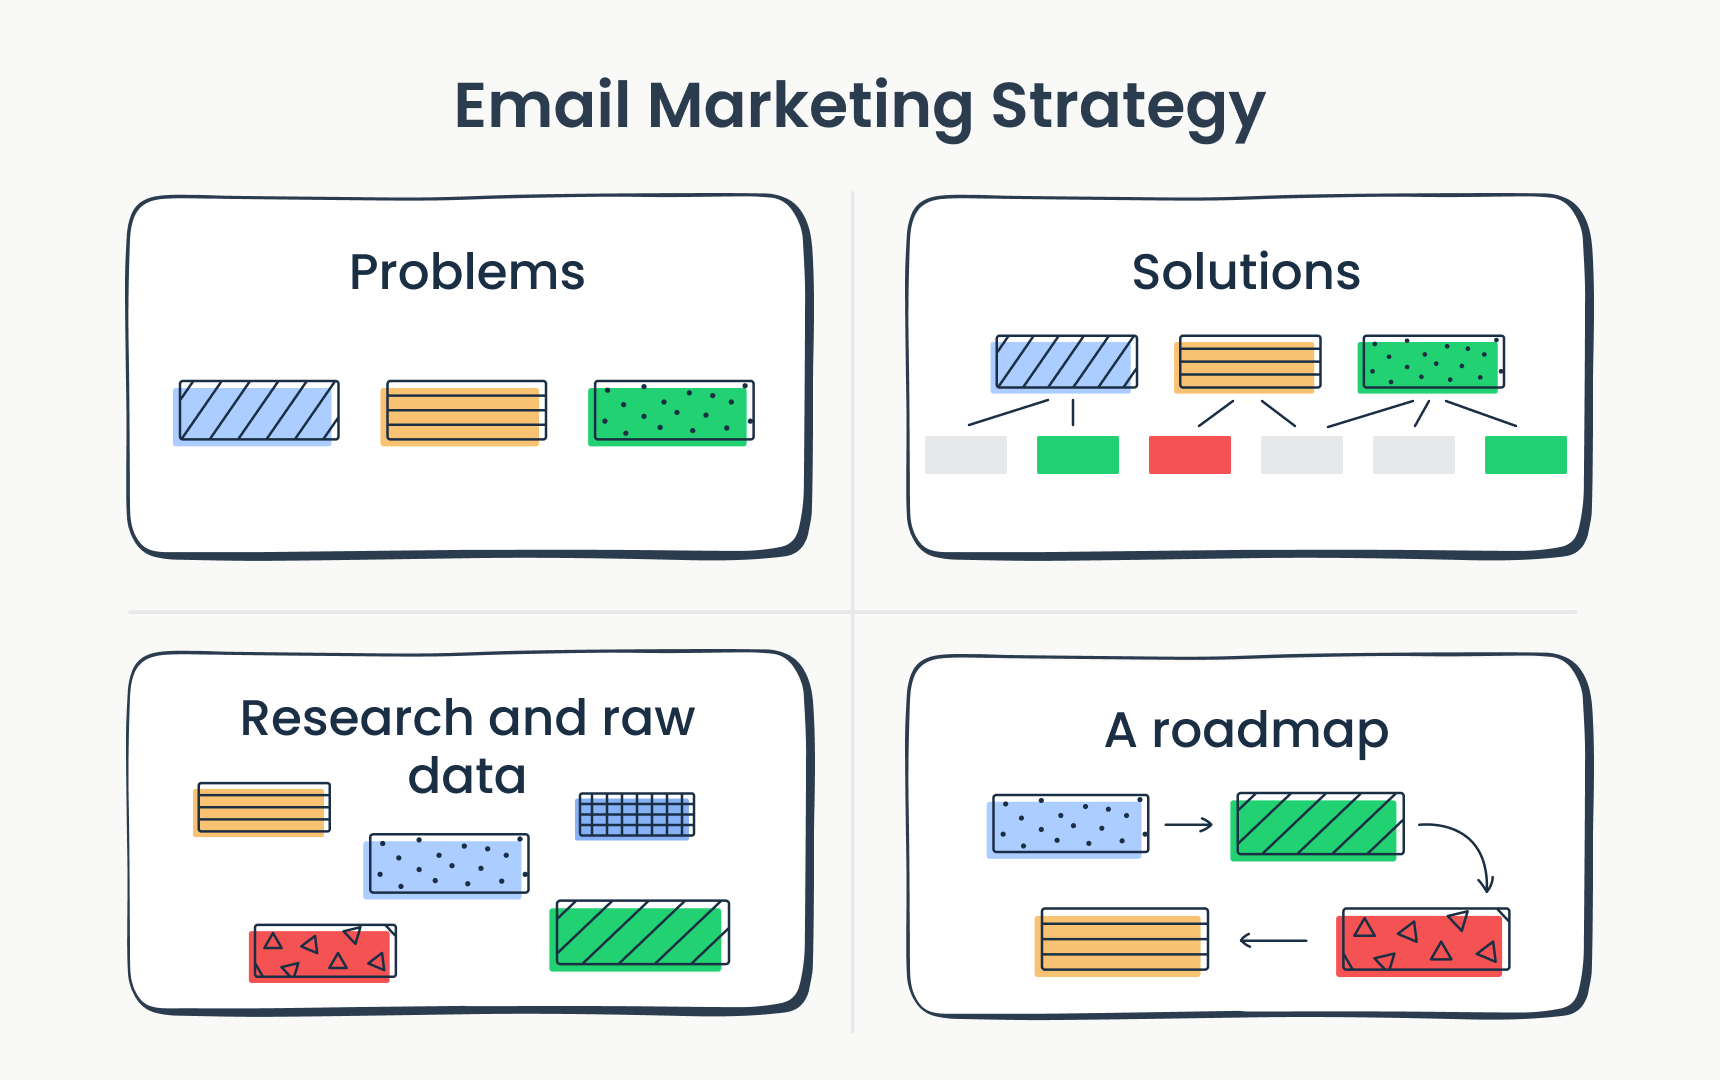 Components of email marketing strategy: problems, solutions, research and raw data, and a roadmap